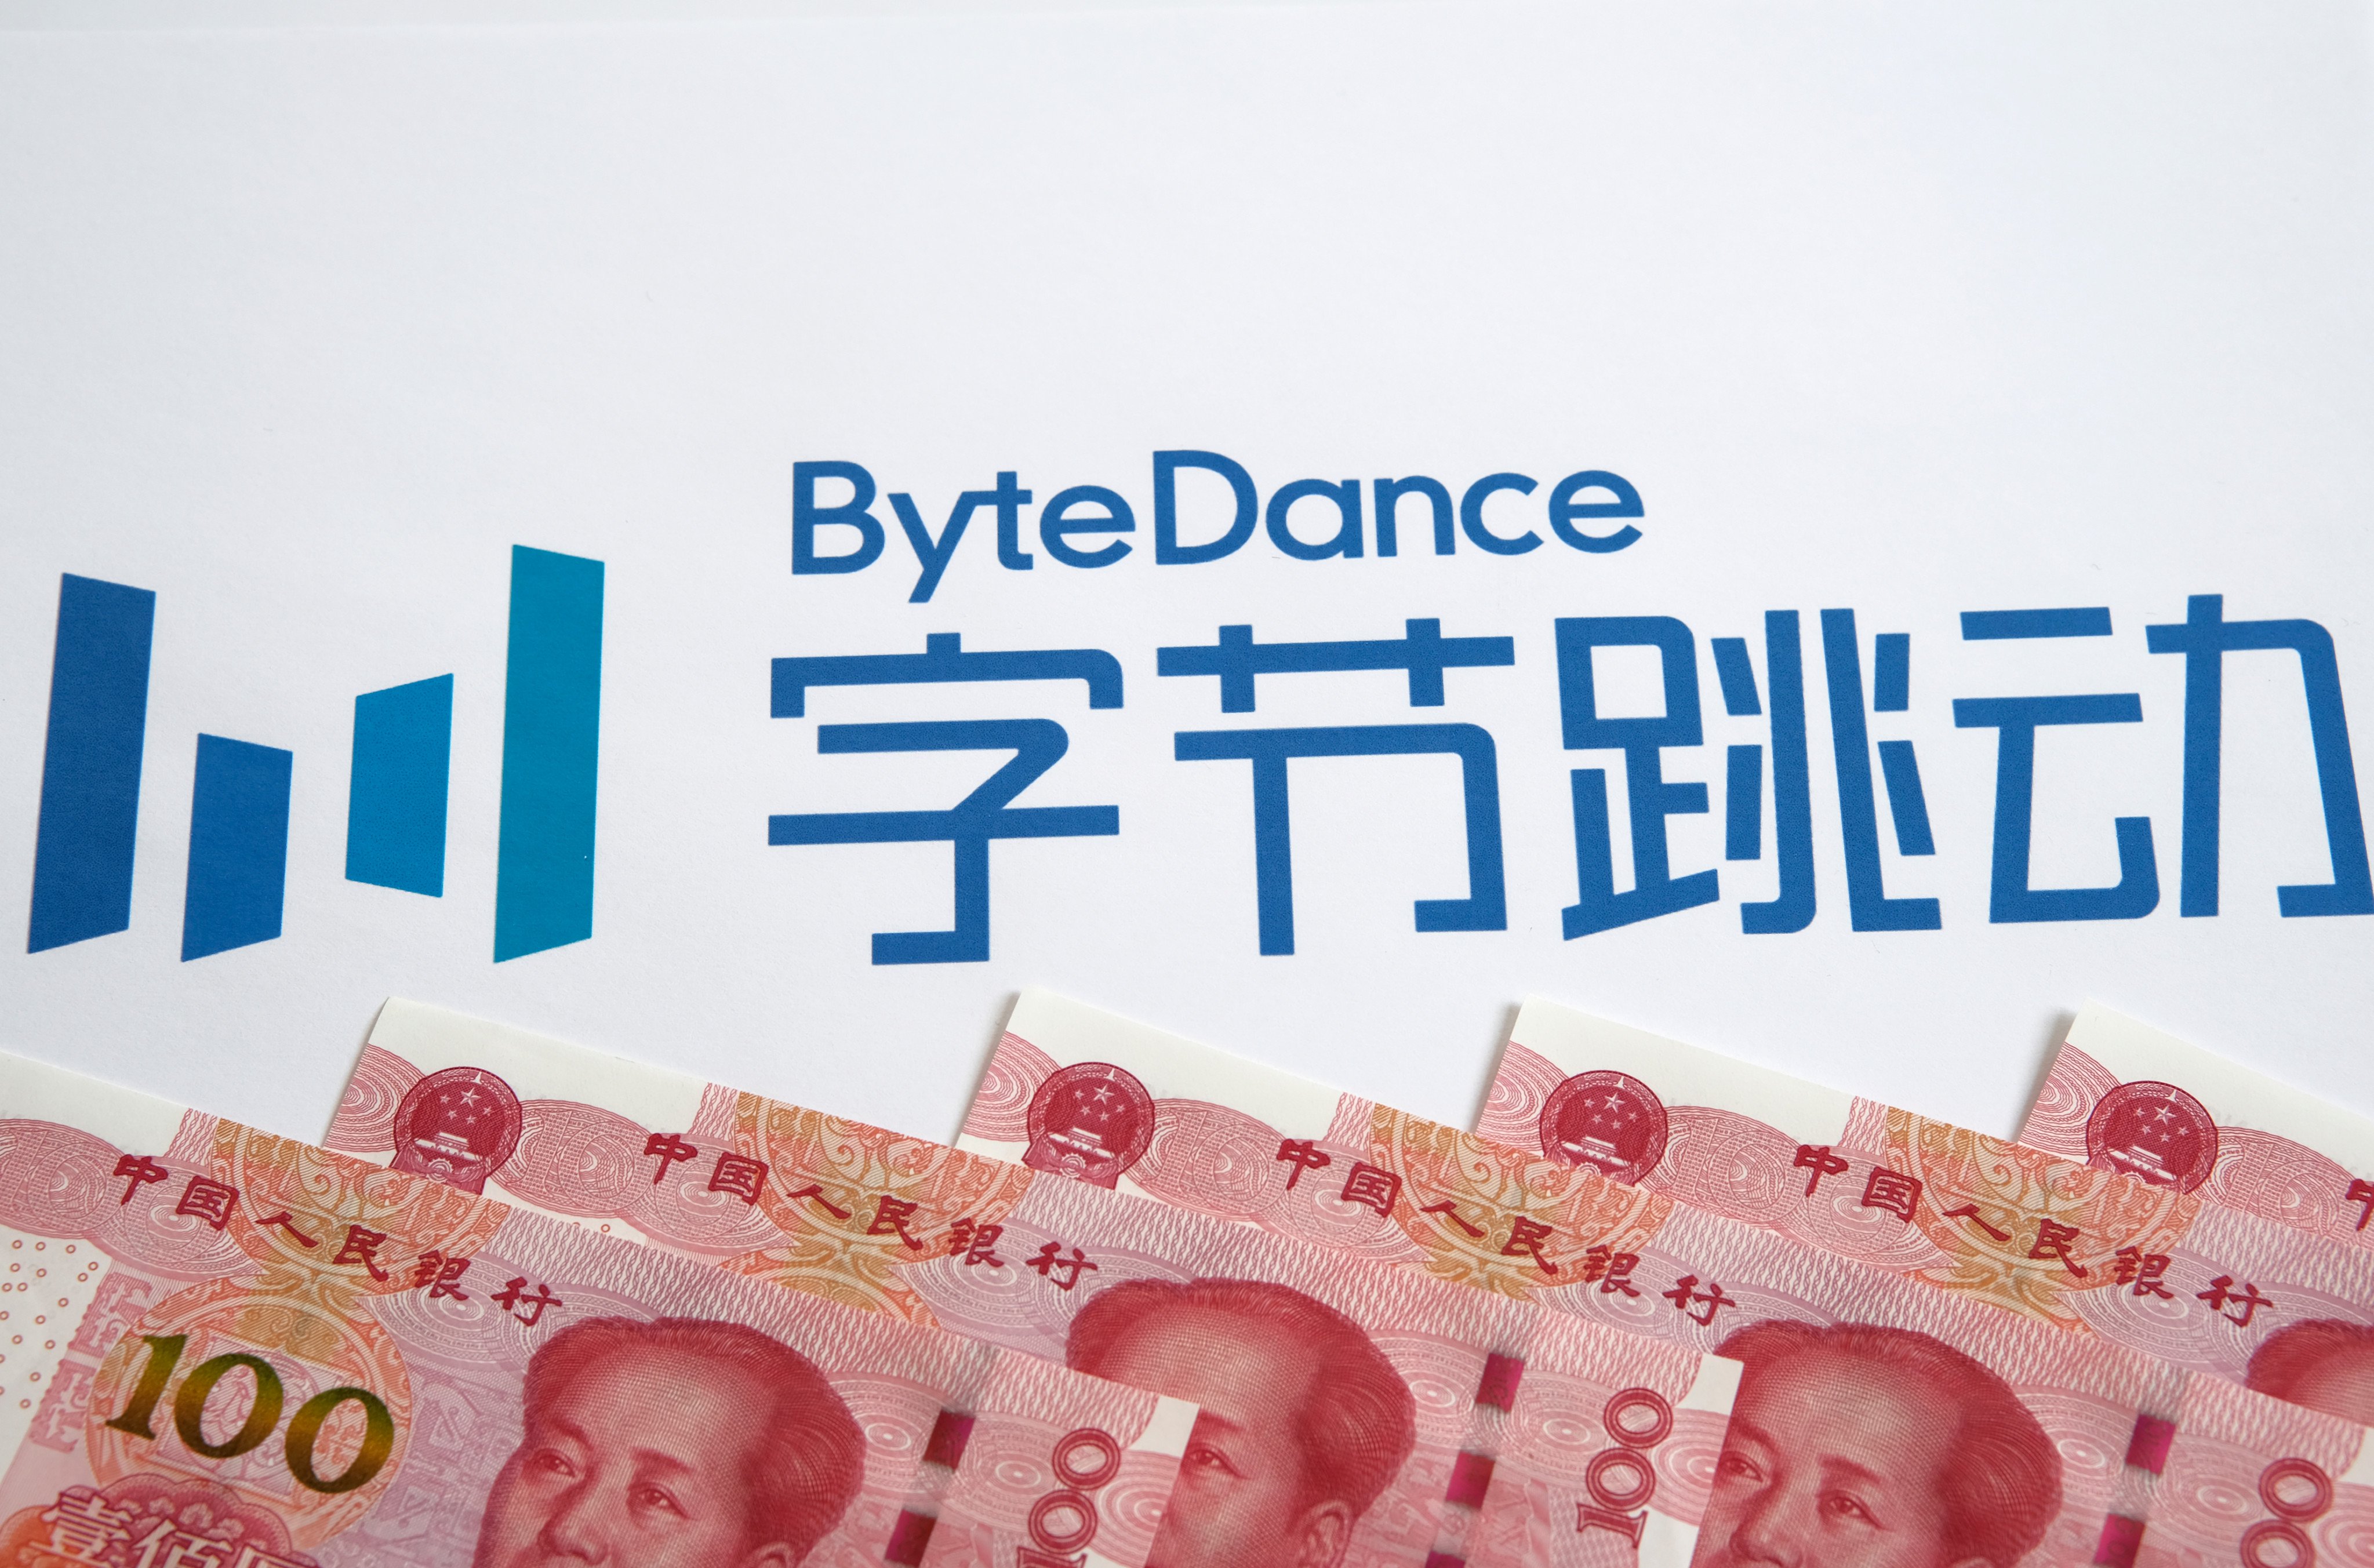 ByteDance is cementing its status as one of China’s fastest growing tech juggernauts. Photo: Shutterstock Images